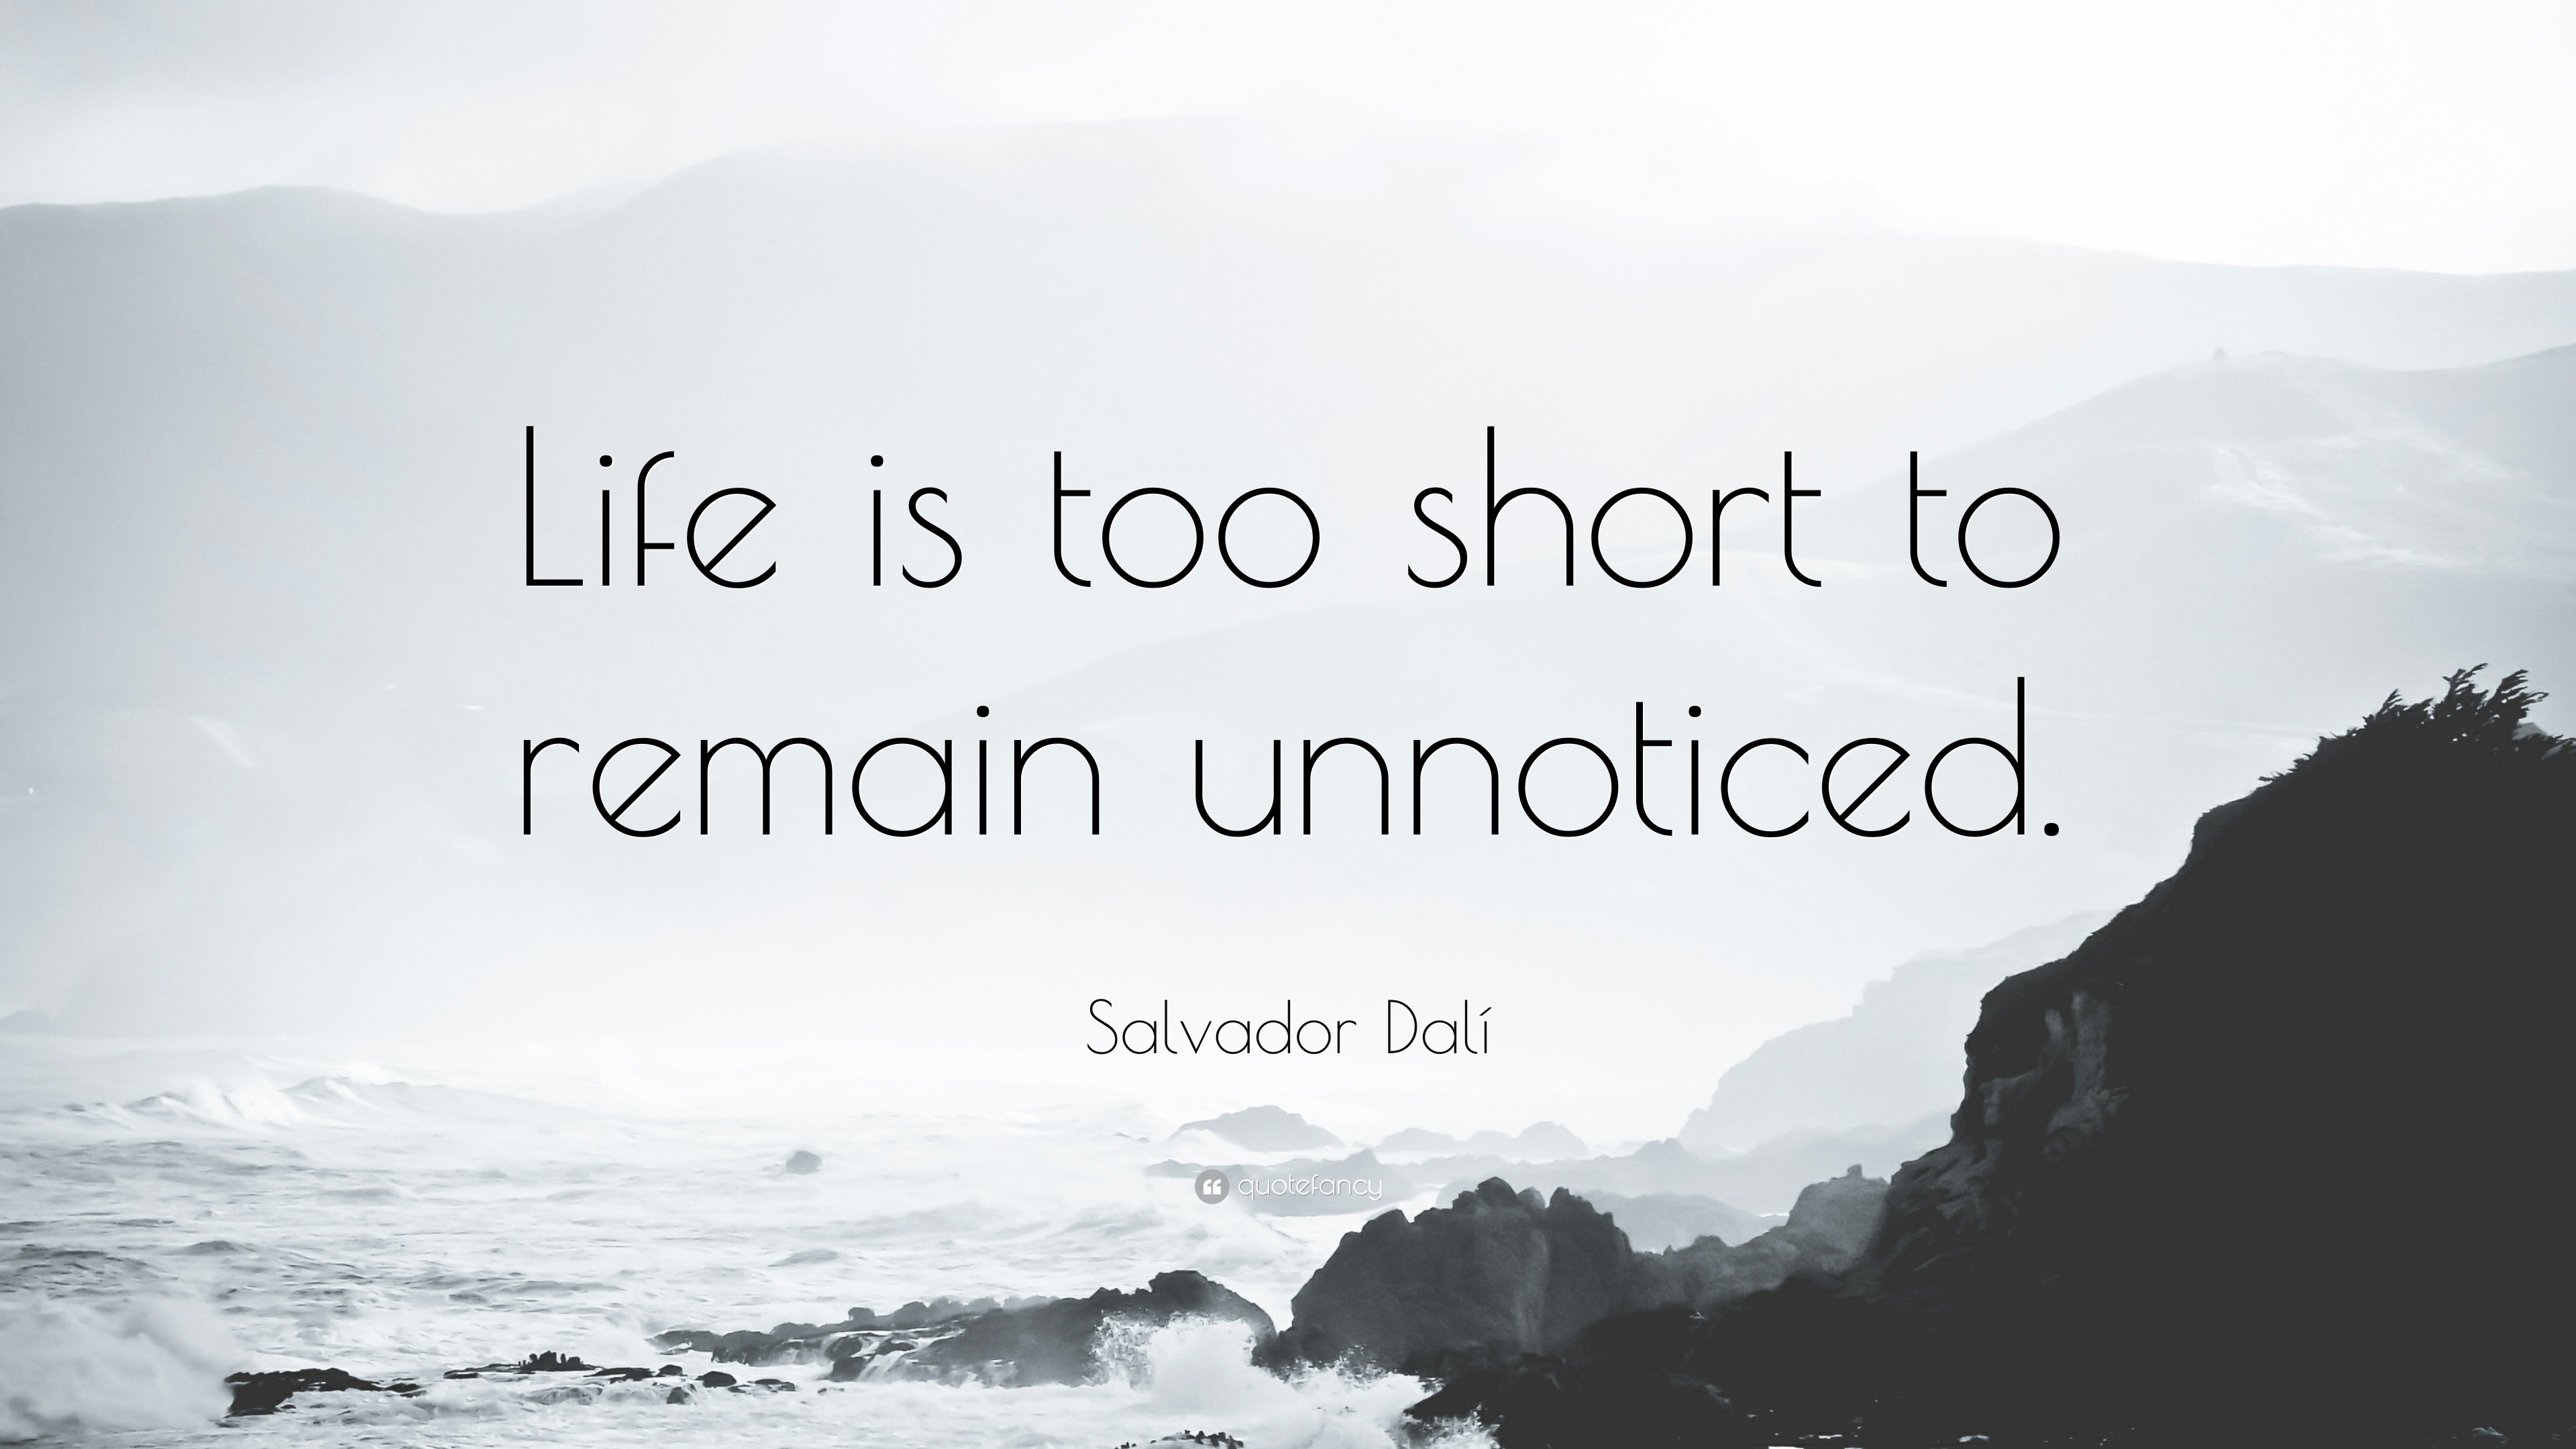 Salvador Dalí Quote: “Life is too short to remain unnoticed.”